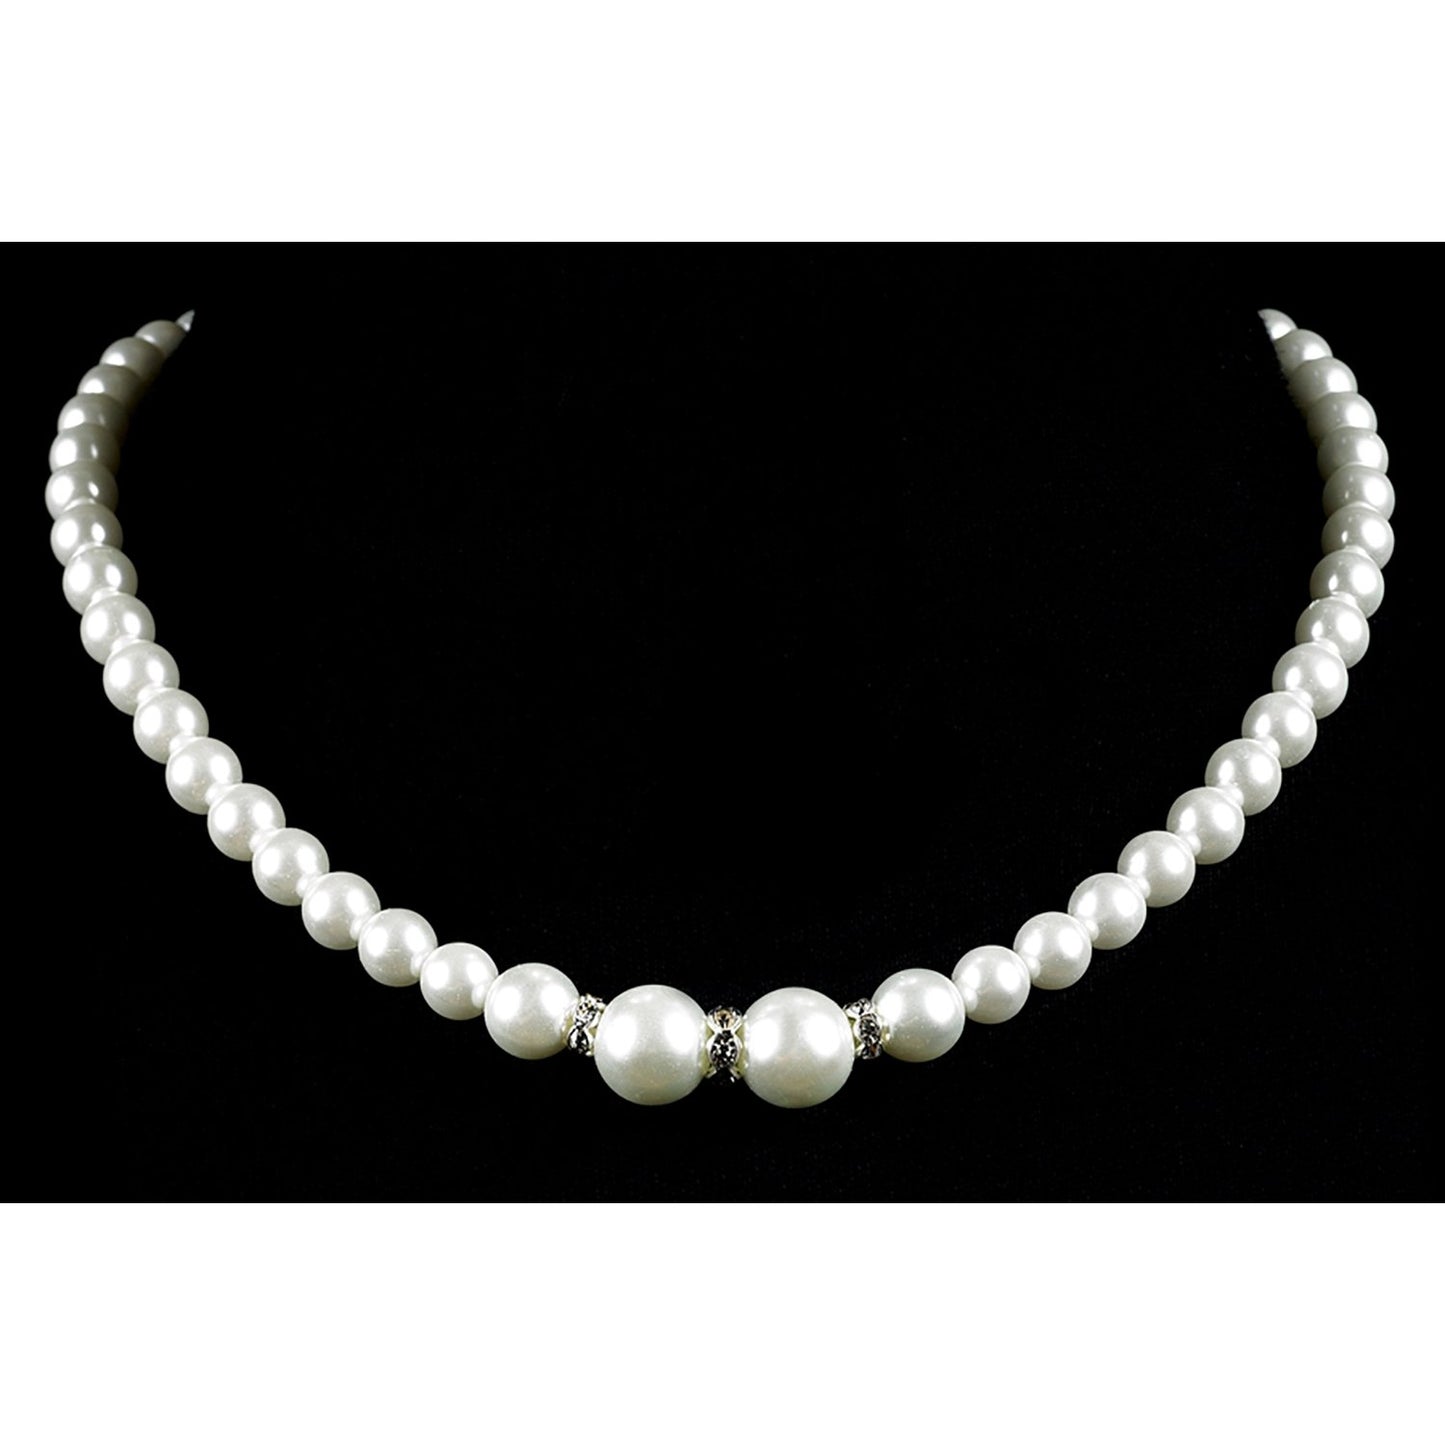 Strung Pearl Necklace